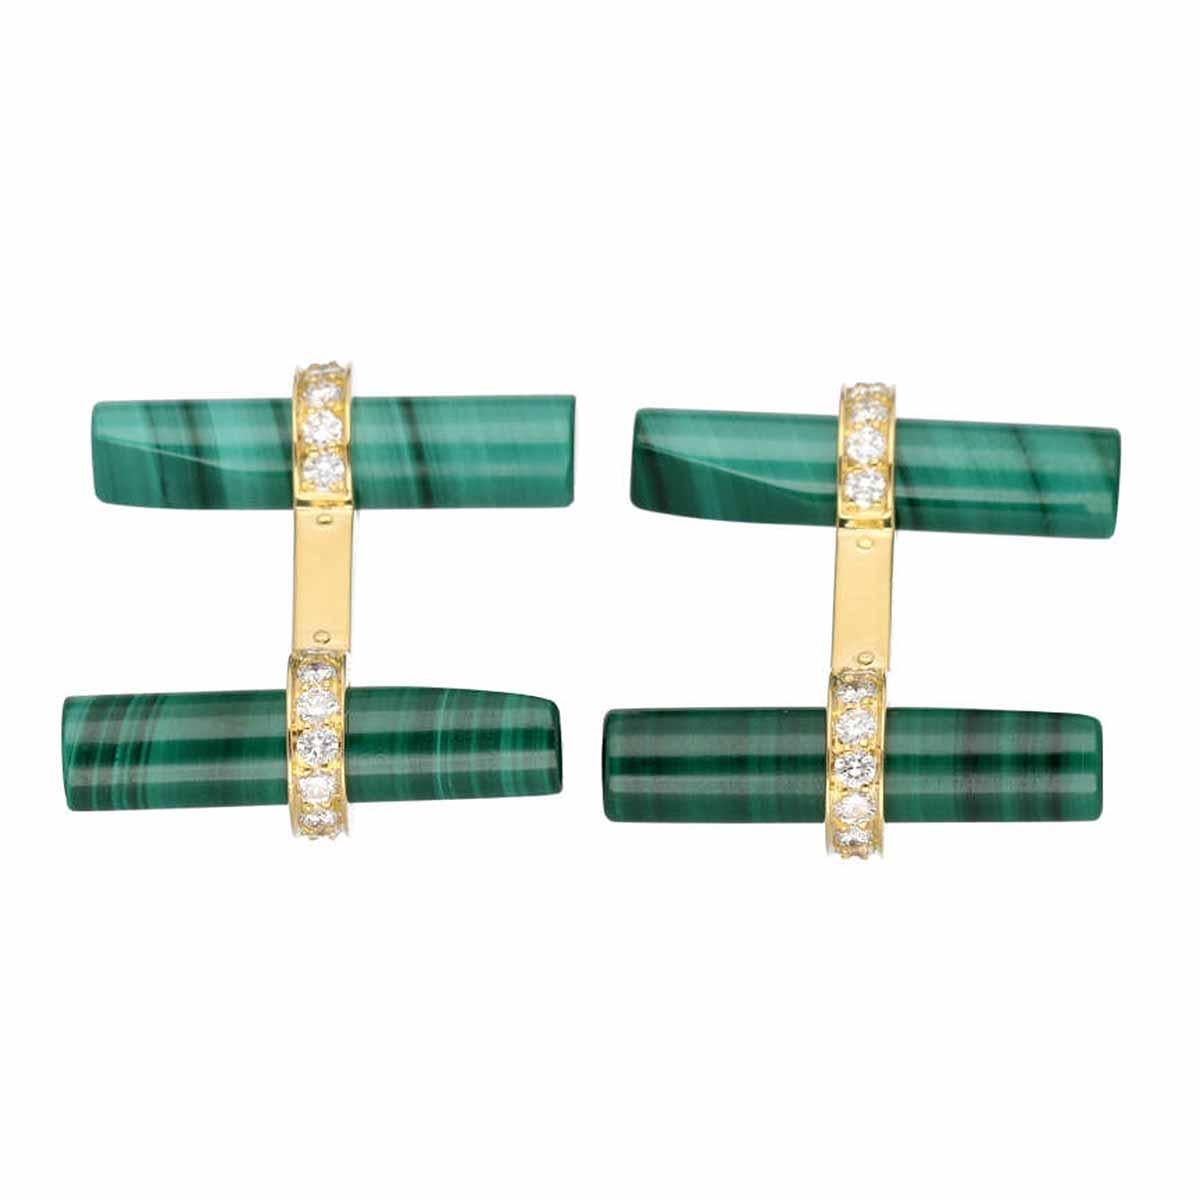 ■Item Number: 23430701
■Brand: Cartier
■Product Name: Diamond and Malachite Cufflinks
■Material: Diamonds, Malachite, 750 K18 YG Yellow Gold
■Weight: Approximately 11.5g (Pair)
■Top Size: Approximately H24.17mm x W22.14mm / 0.95